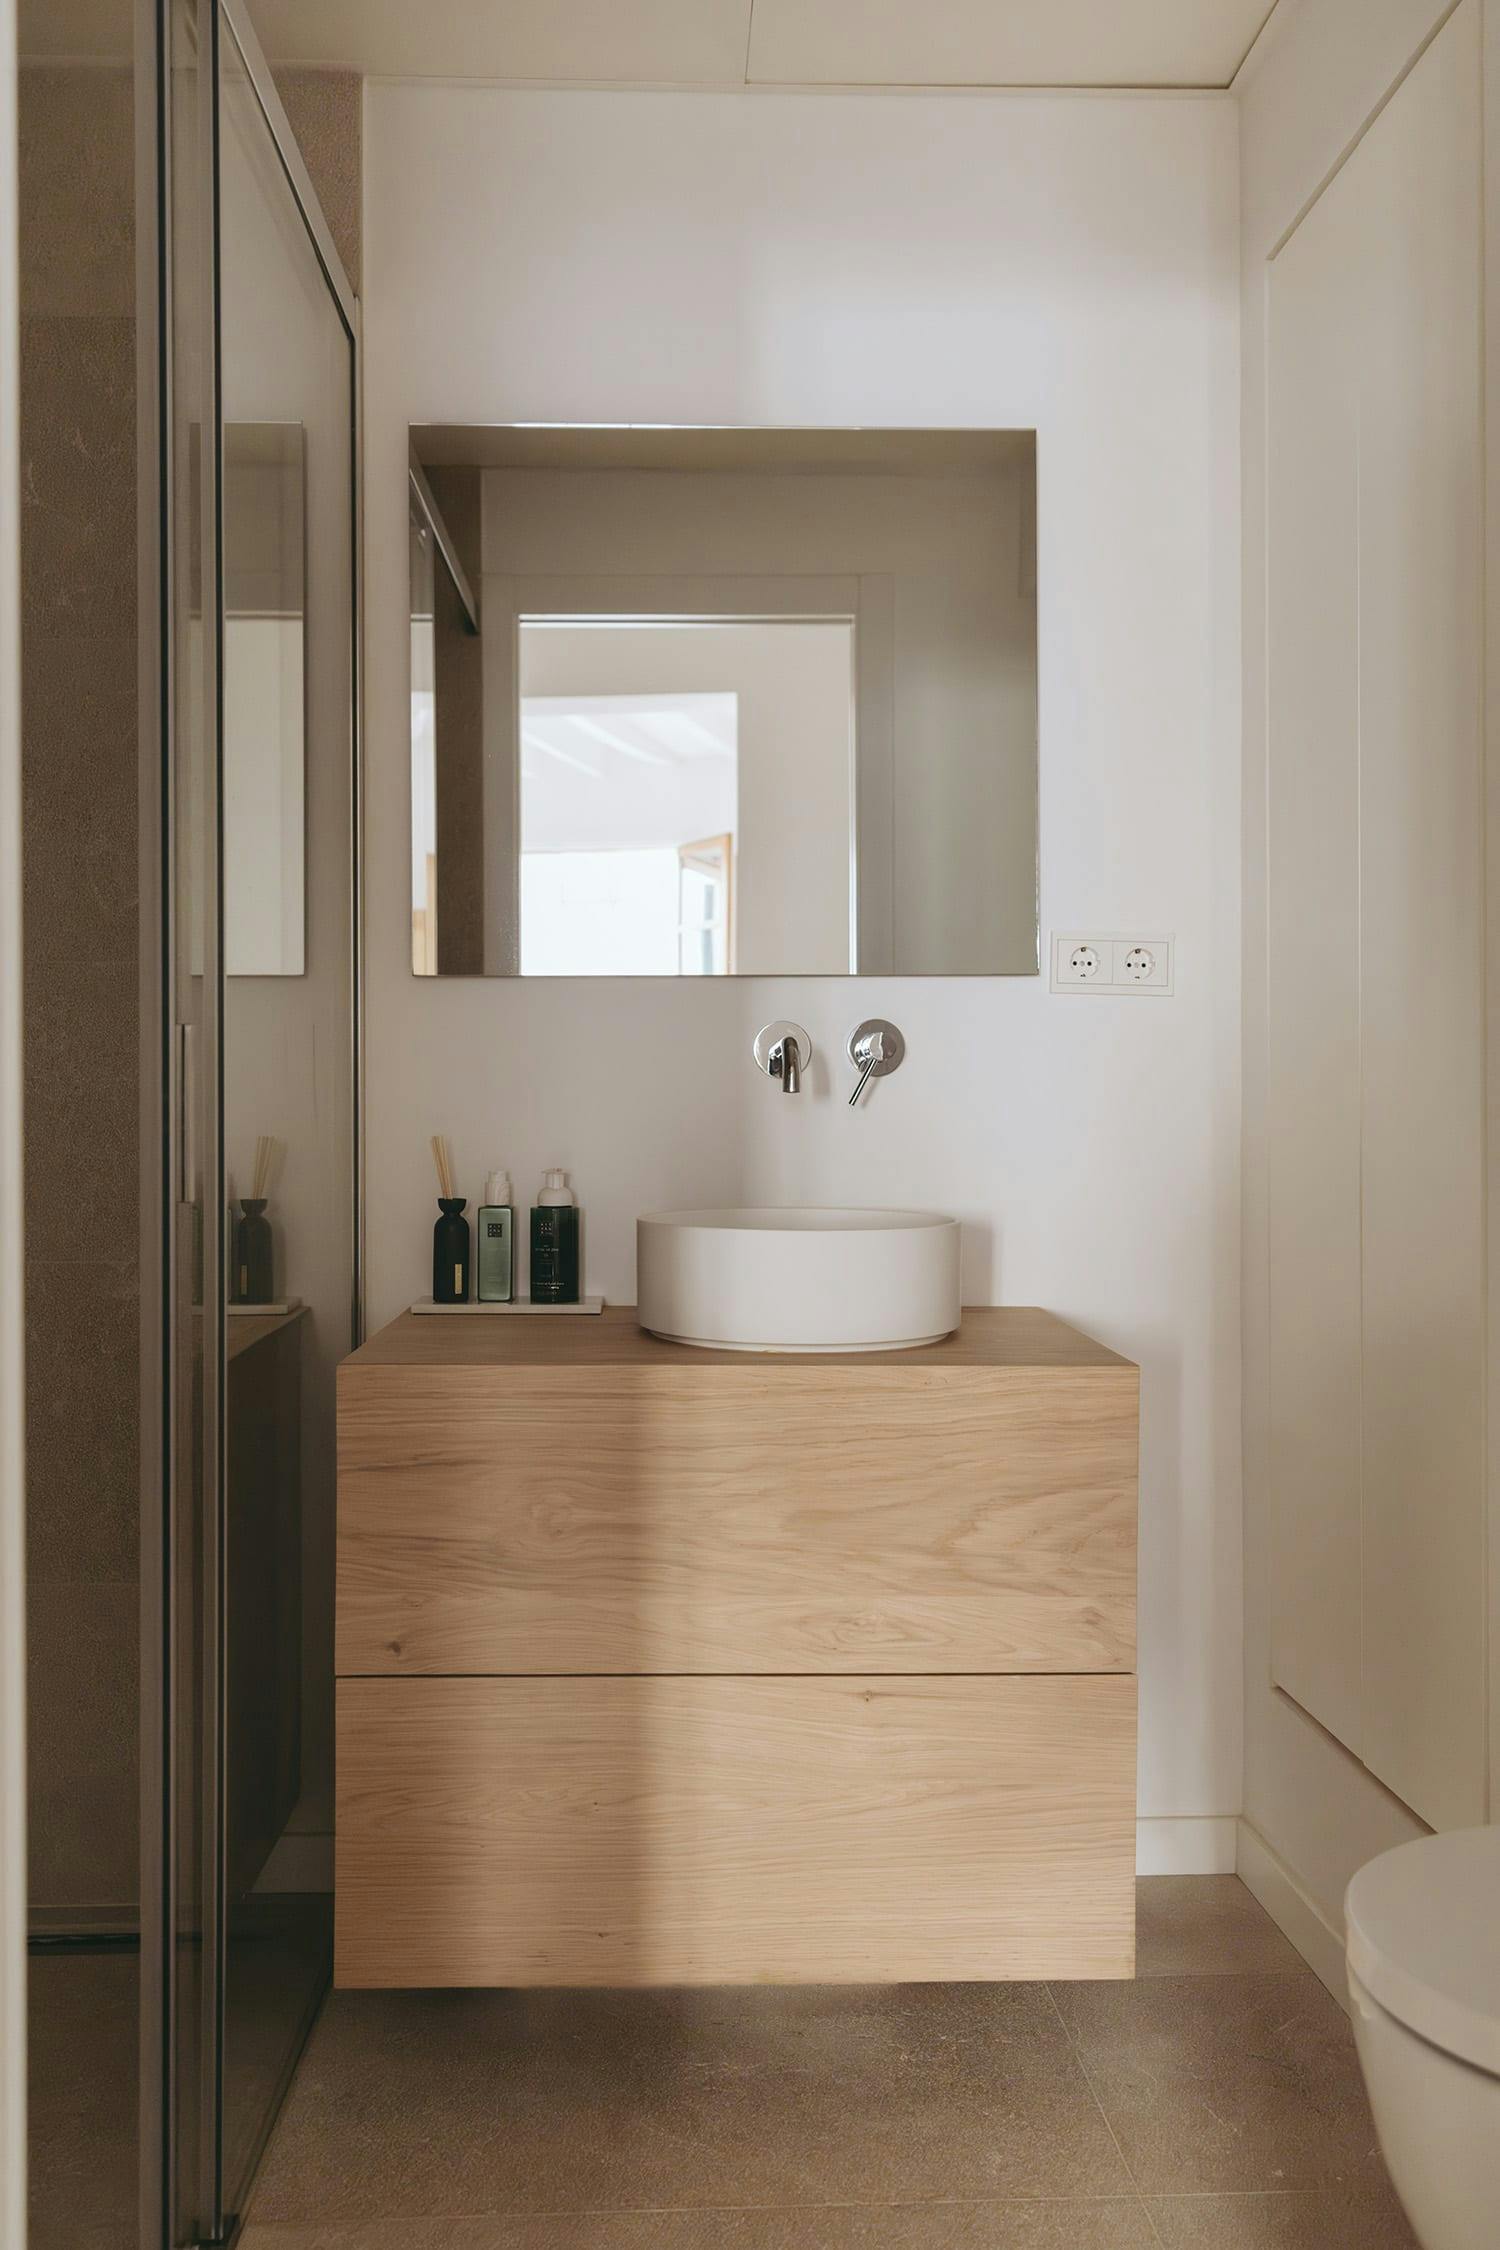 The image features a modern bathroom with a white sink, a mirror, and a wooden vanity. The vanity is made of wood and has a mirror above it. The bathroom is clean and well-organized, with a toilet located in the corner.

In addition to the main sink, there is a small wooden cabinet or shelf above it, which is also white. The bathroom appears to be well-lit, with a window providing natural light. The overall design of the bathroom is minimalistic and clean, making it suitable for a modern and minimalist aesthetic.